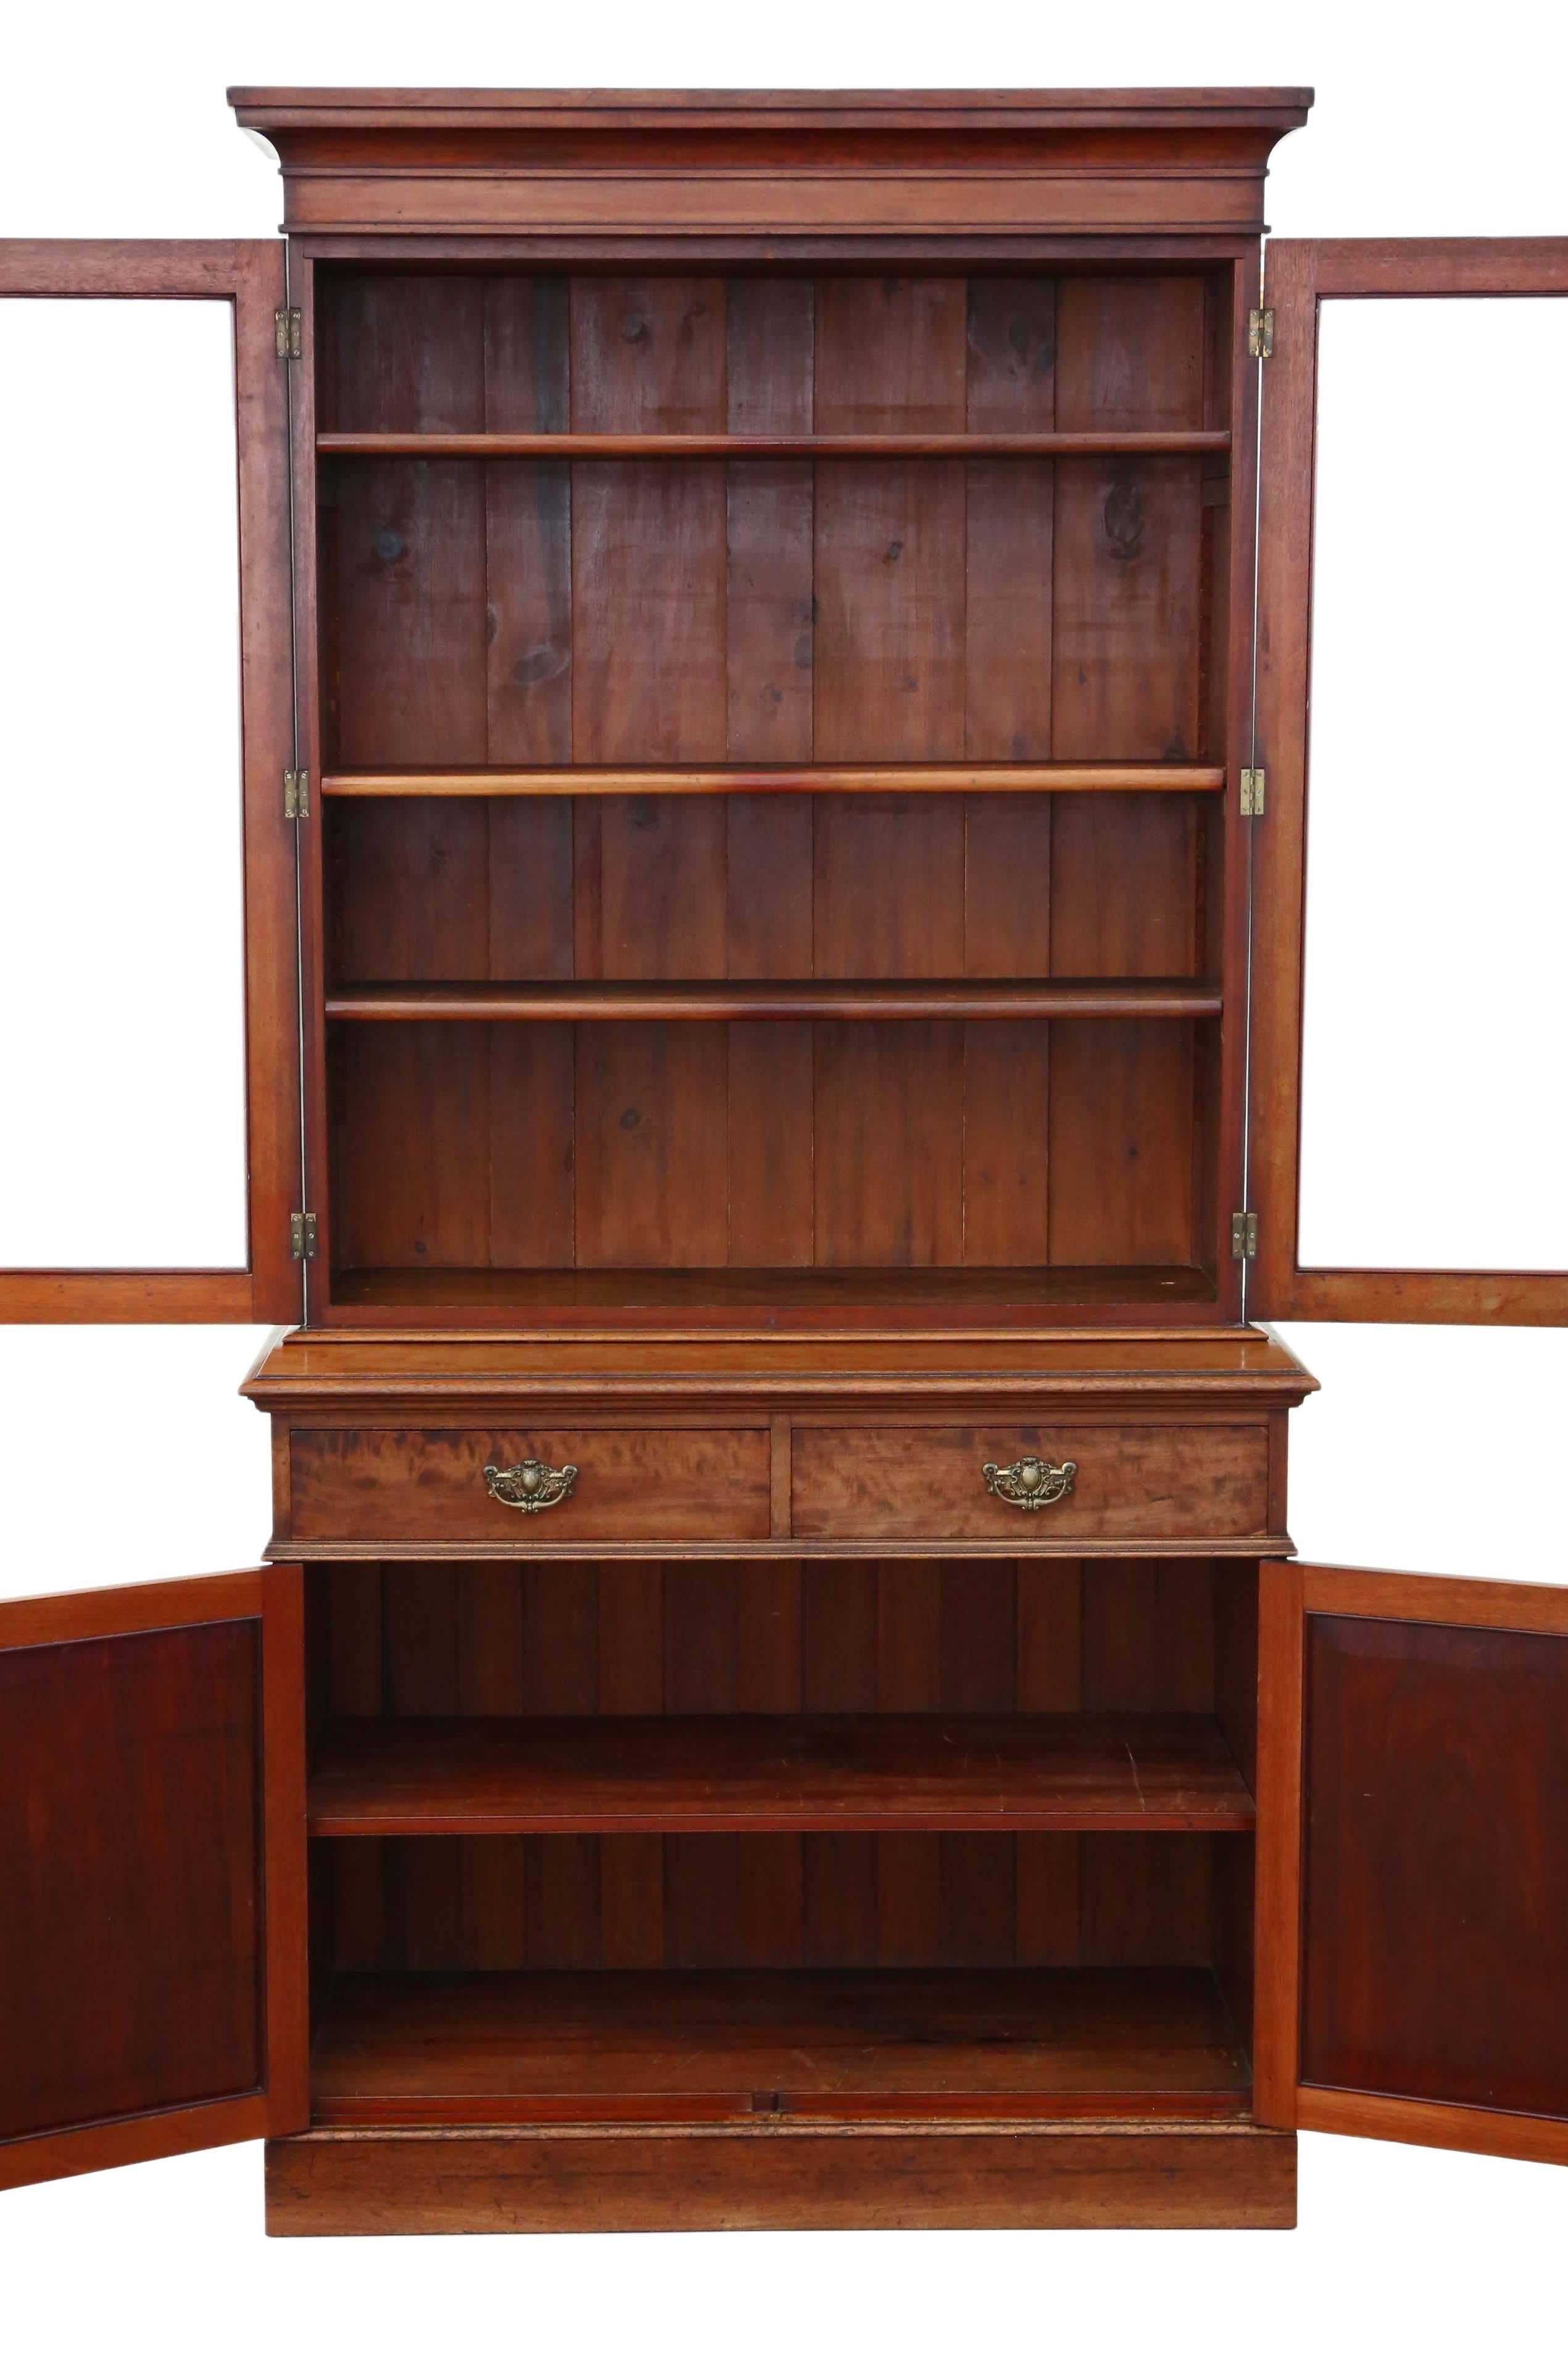 Antique Tall Victorian Mahogany Glazed Bookcase Cupboard Display Cabinet In Good Condition For Sale In Wisbech, Walton Wisbech